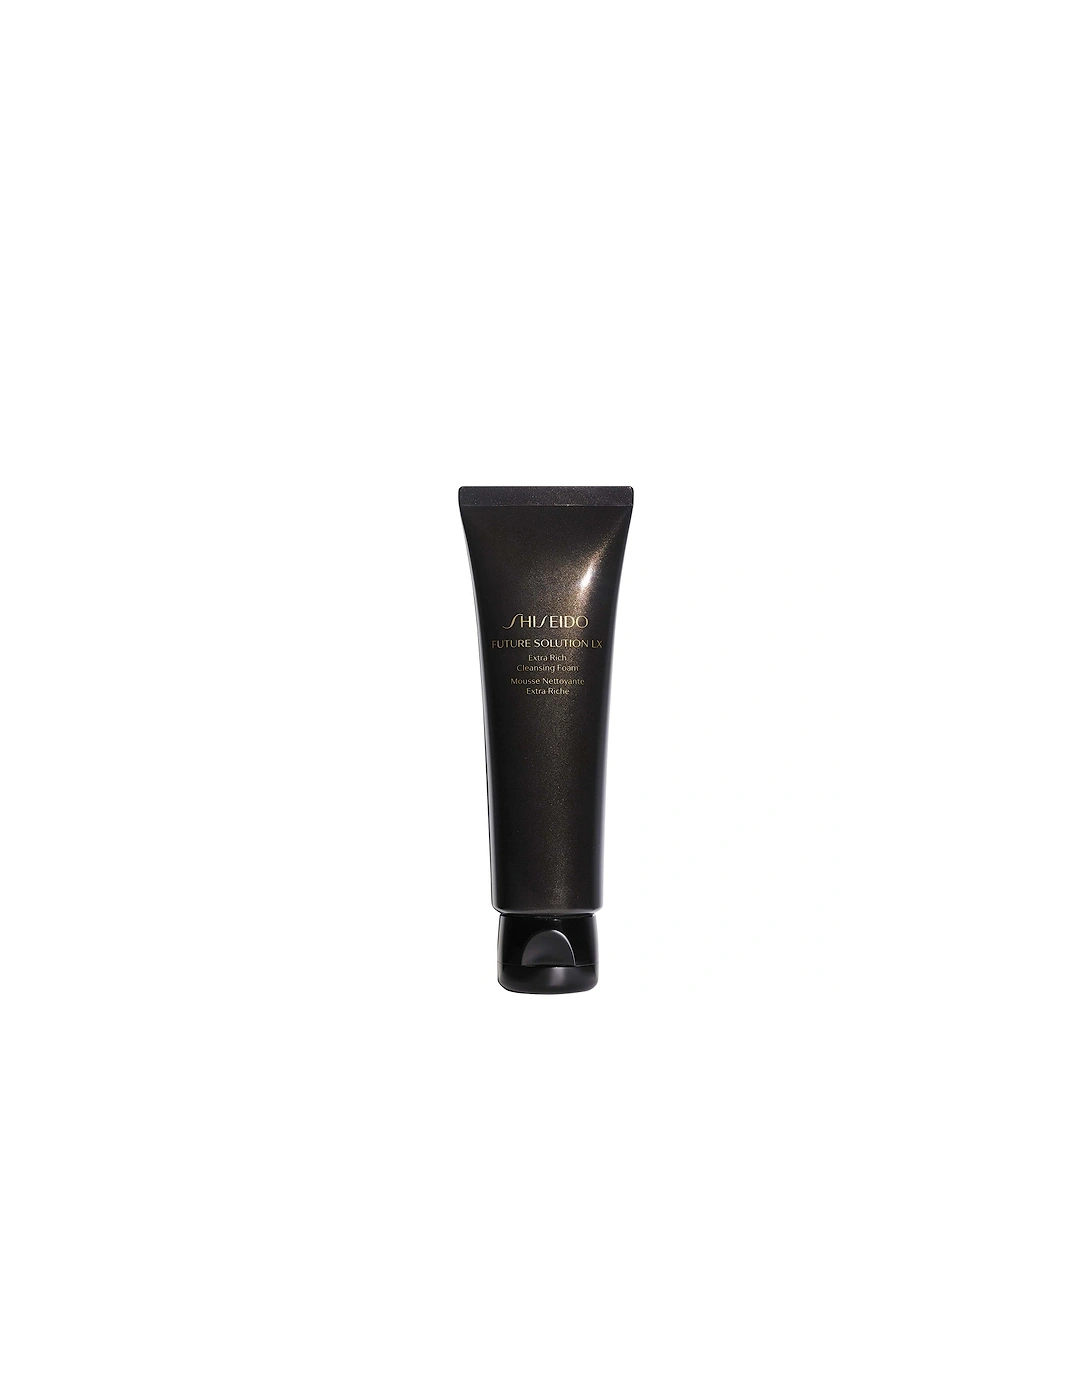 Future Solution LX Extra Rich Cleansing Foam 125ml - Shiseido, 2 of 1